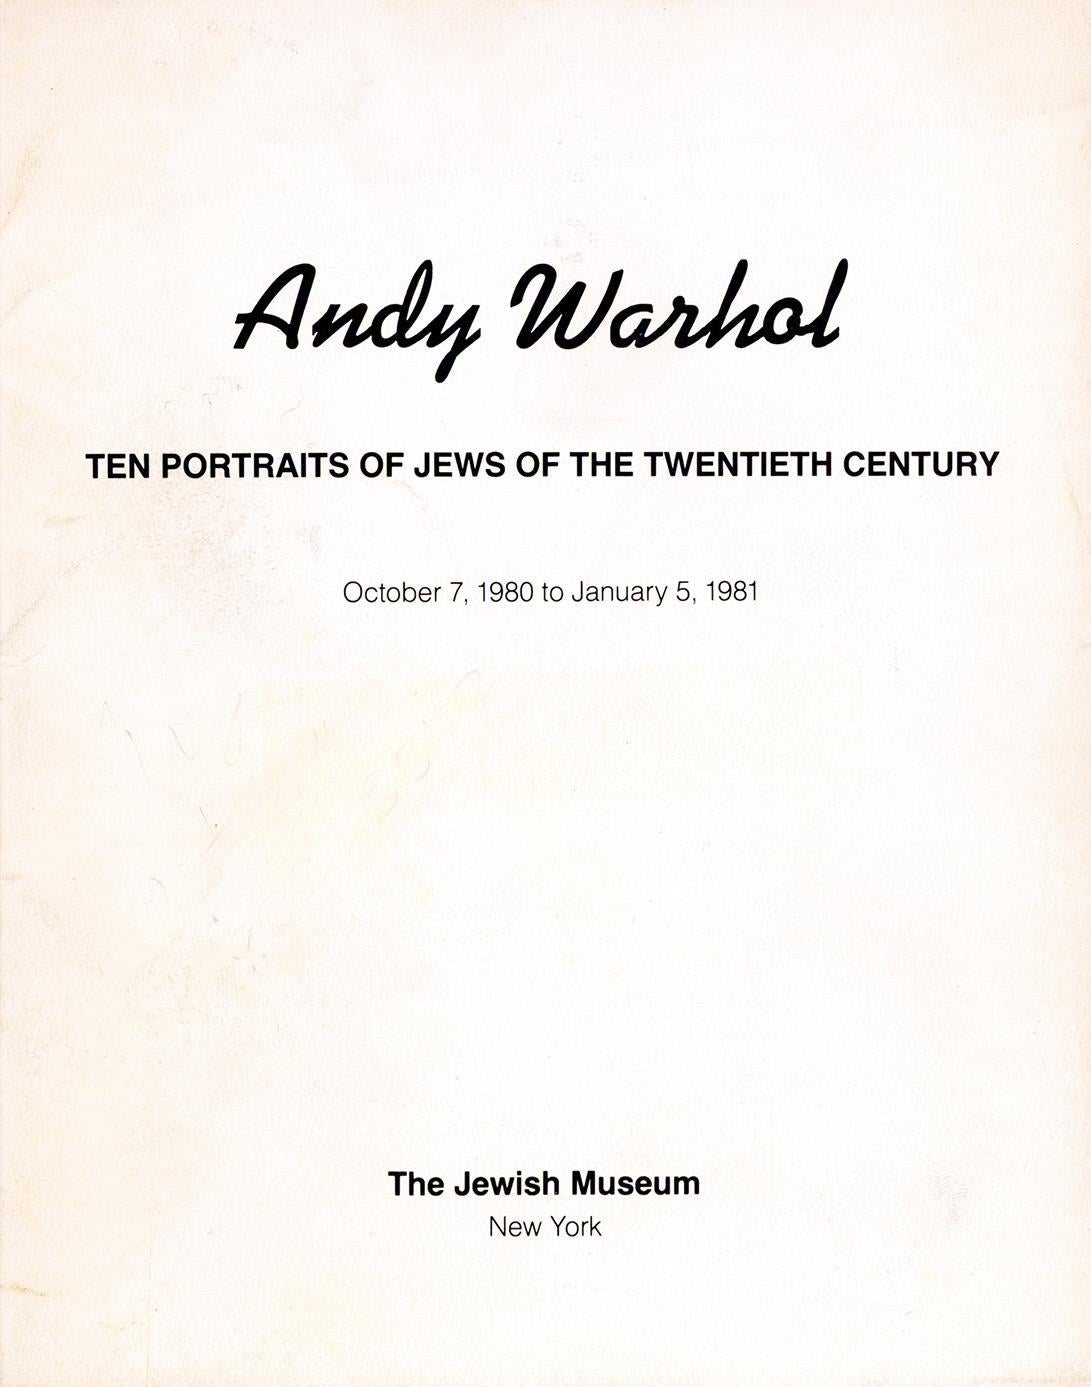 Andy Warhol Portraits of Jews of the 20th Century  (announcements) 7